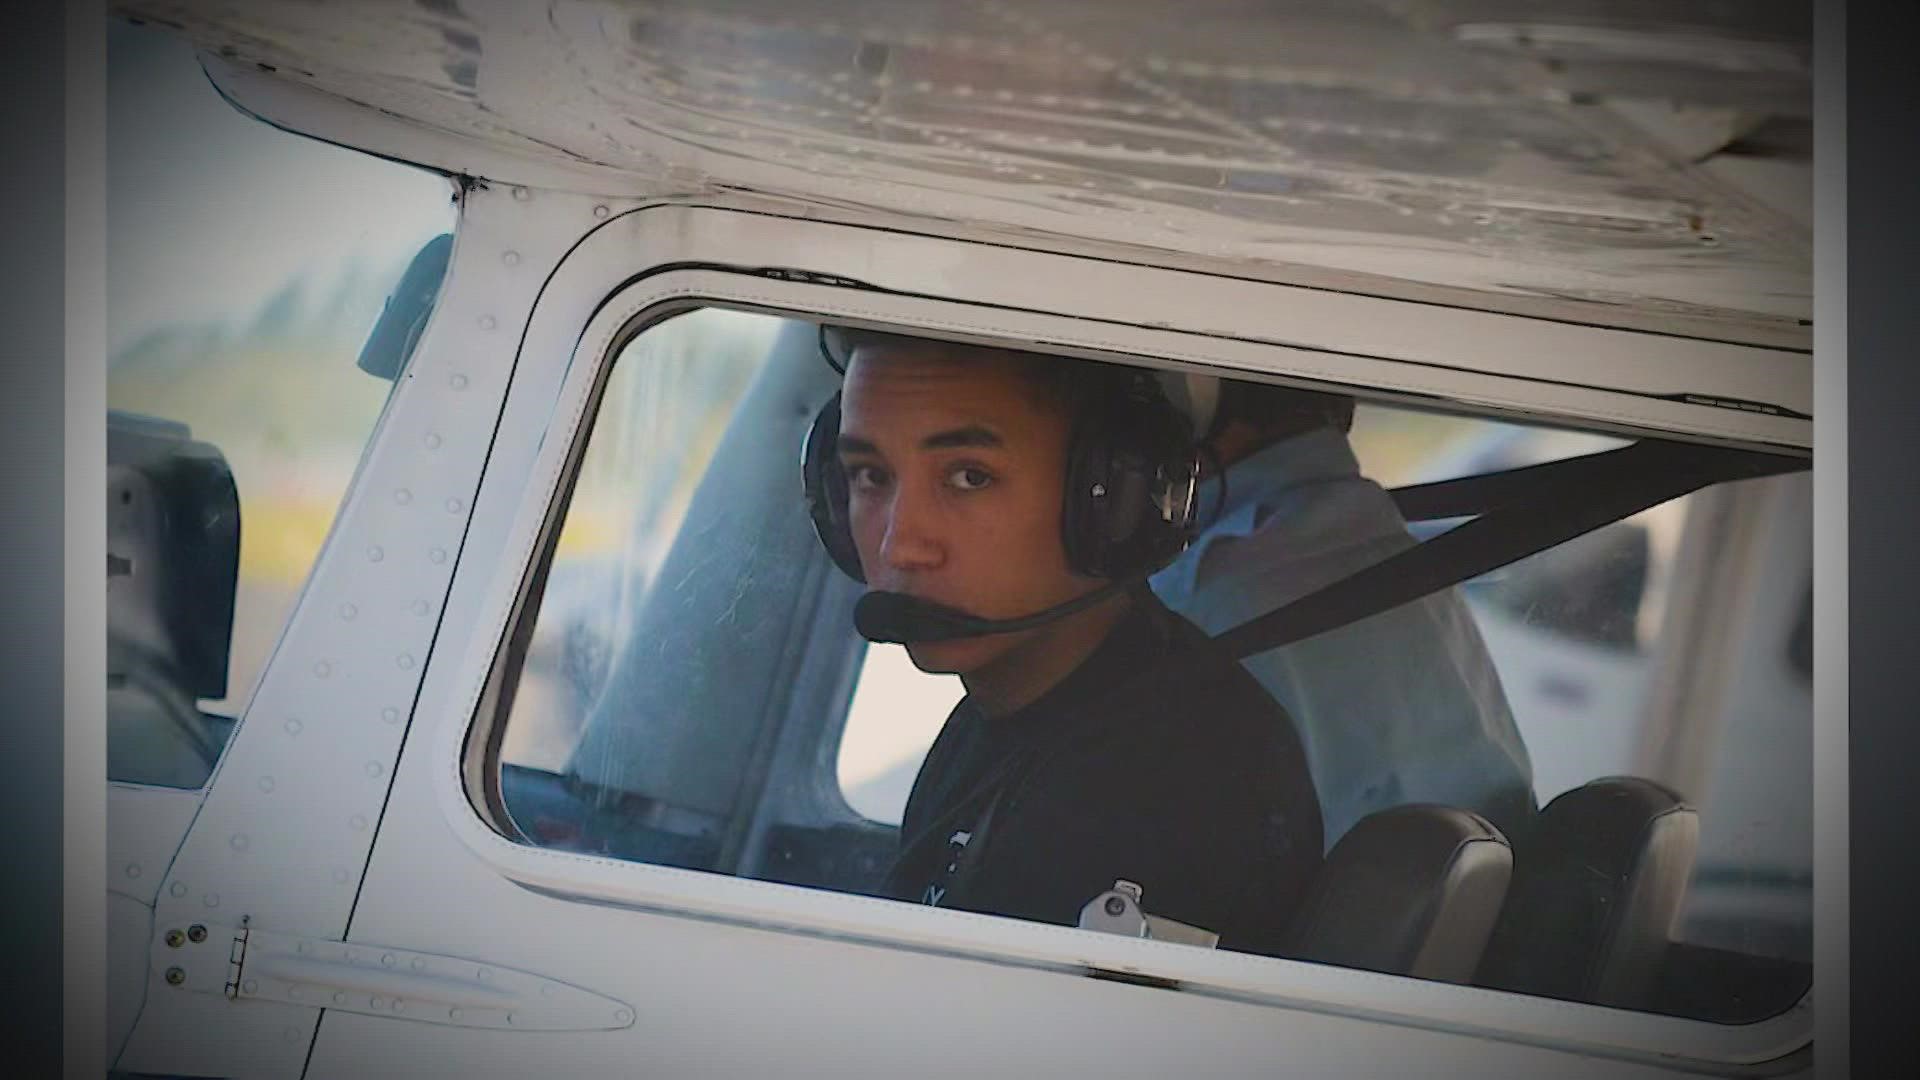 The local nonprofit is helping young people pay for flight school and advocating for a more diverse workforce in the industry.